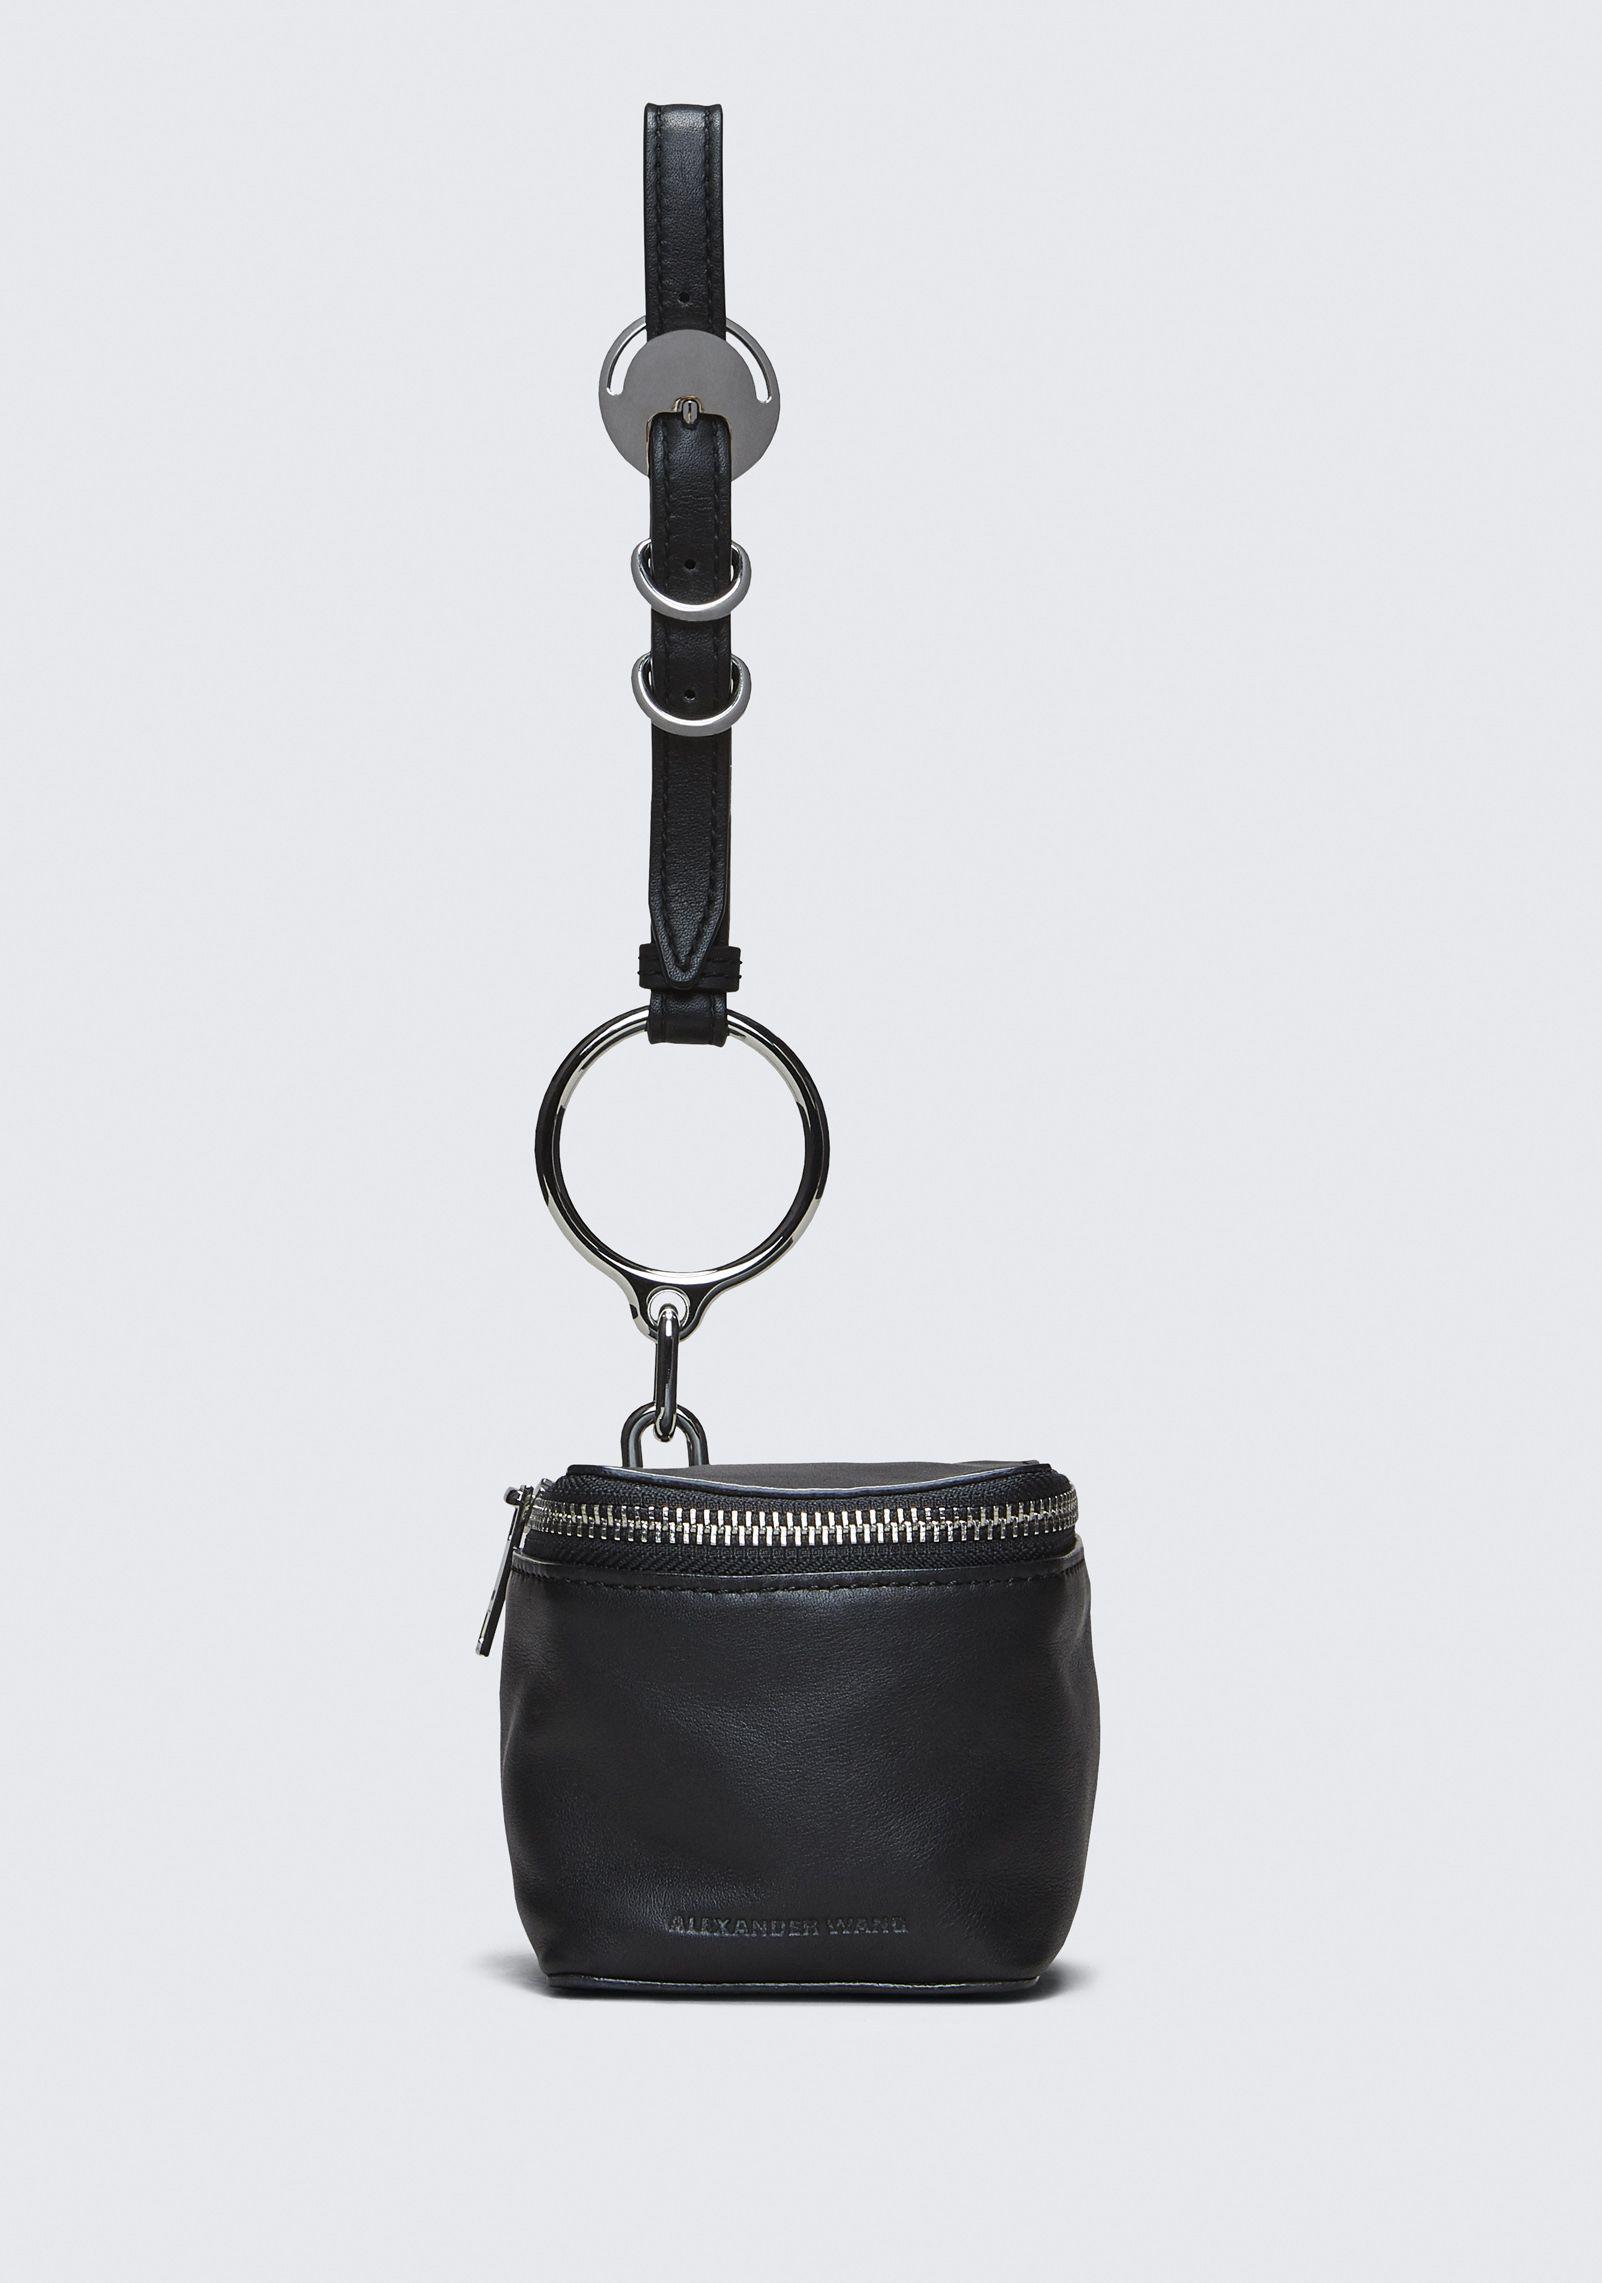 Alexander Wang Leather Ace Cube Wristlet in Black - Lyst